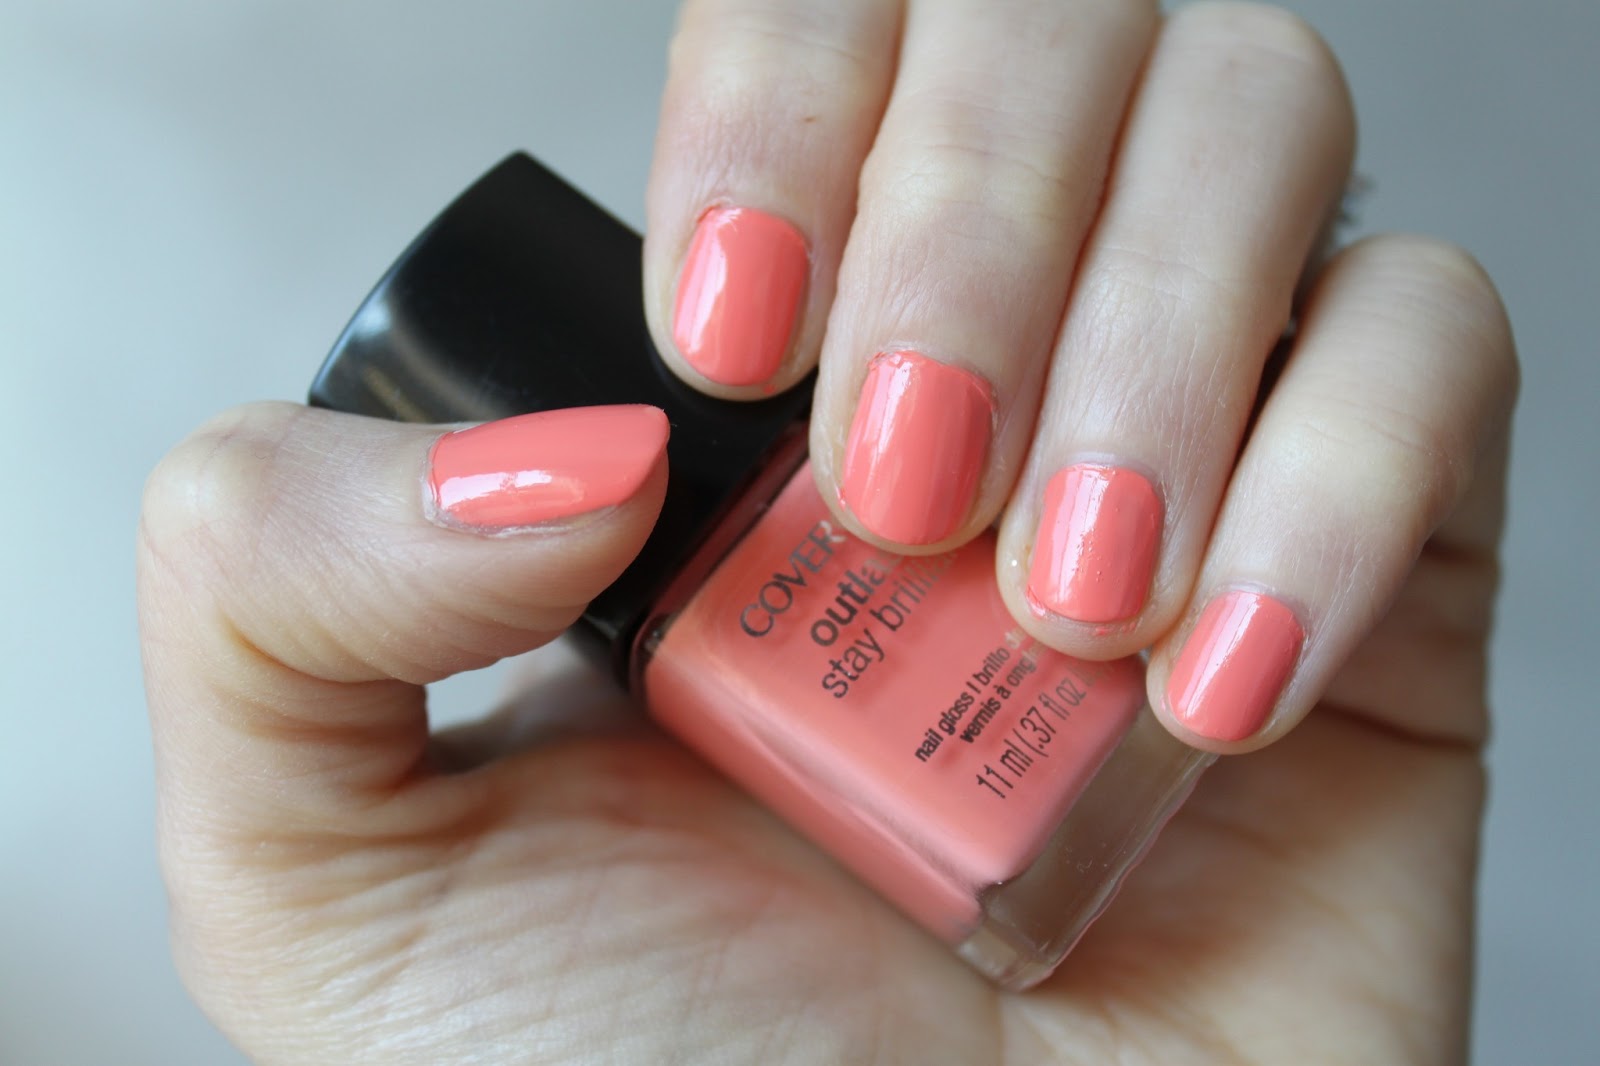 9. Covergirl Outlast Stay Brilliant Nail Gloss in "Sunkissed" - wide 5